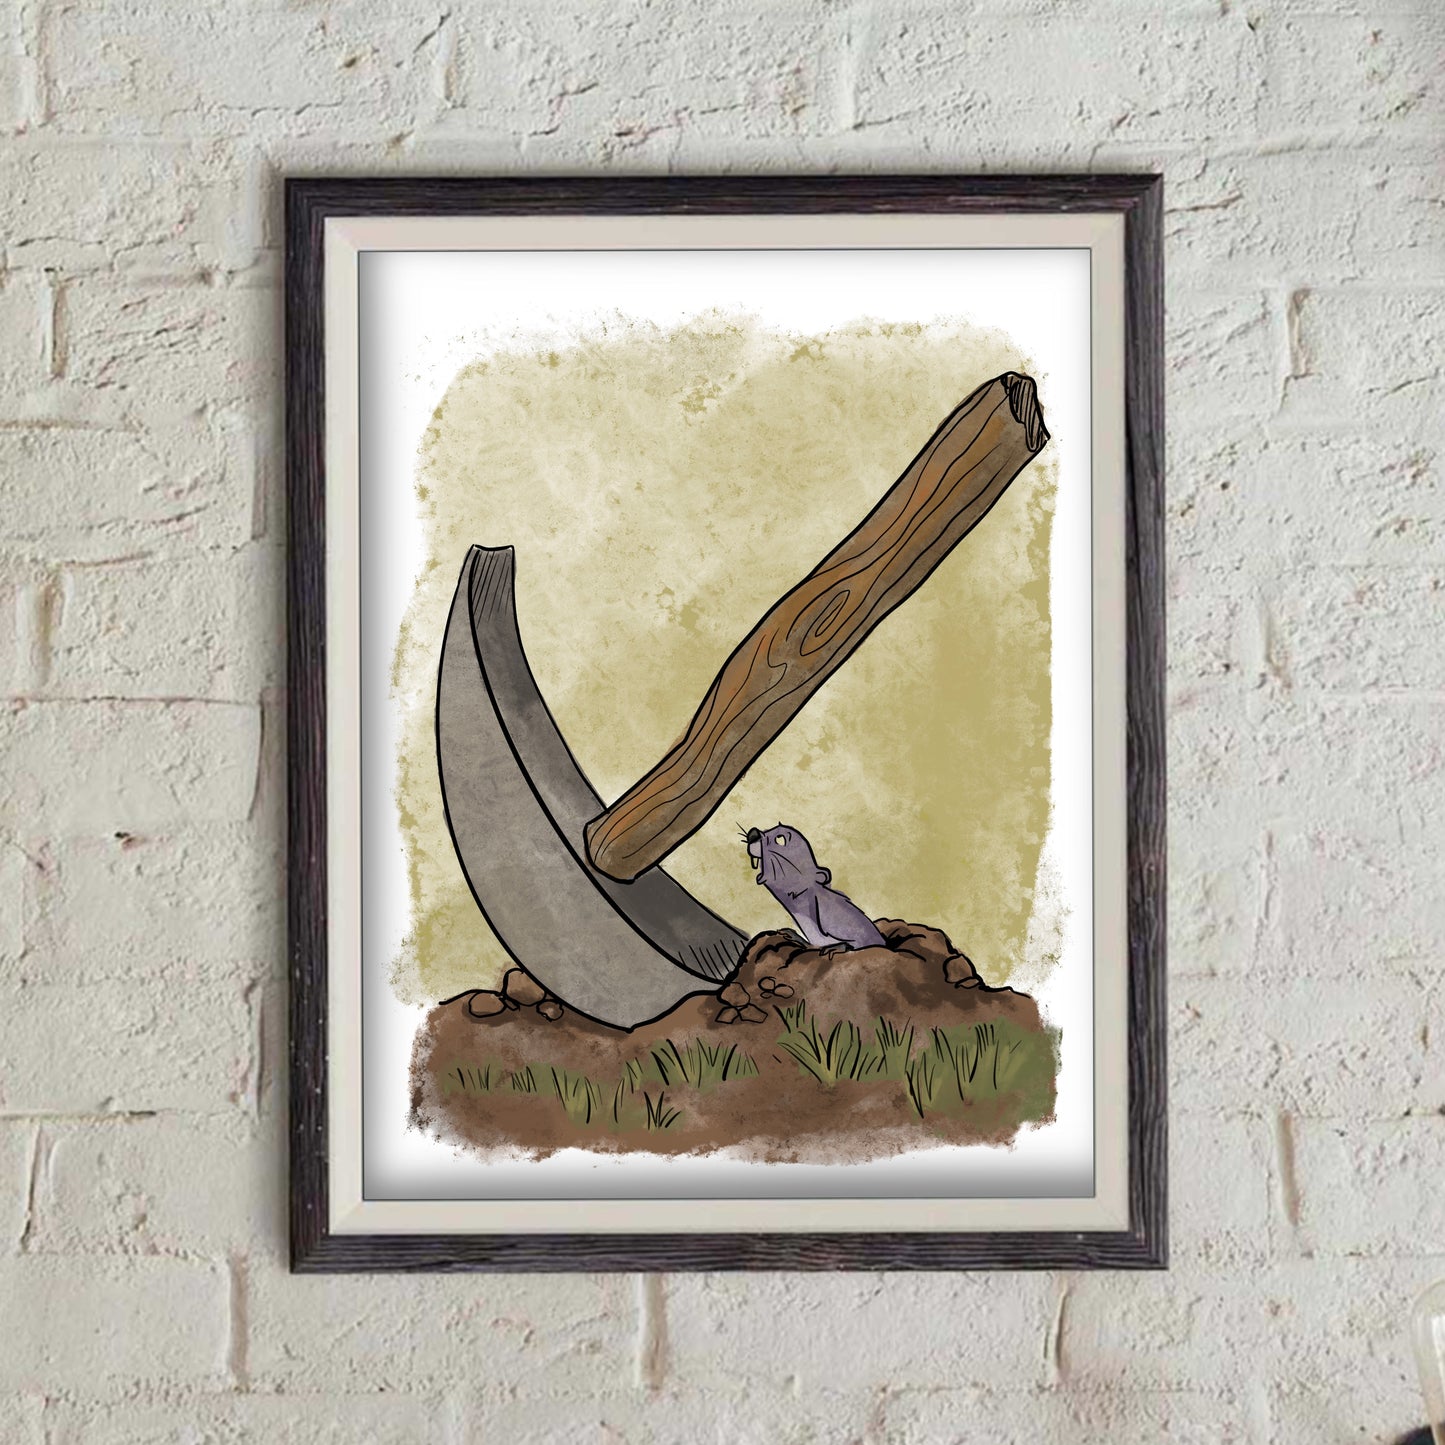 Gopher with a Pickaxe - Pooh print